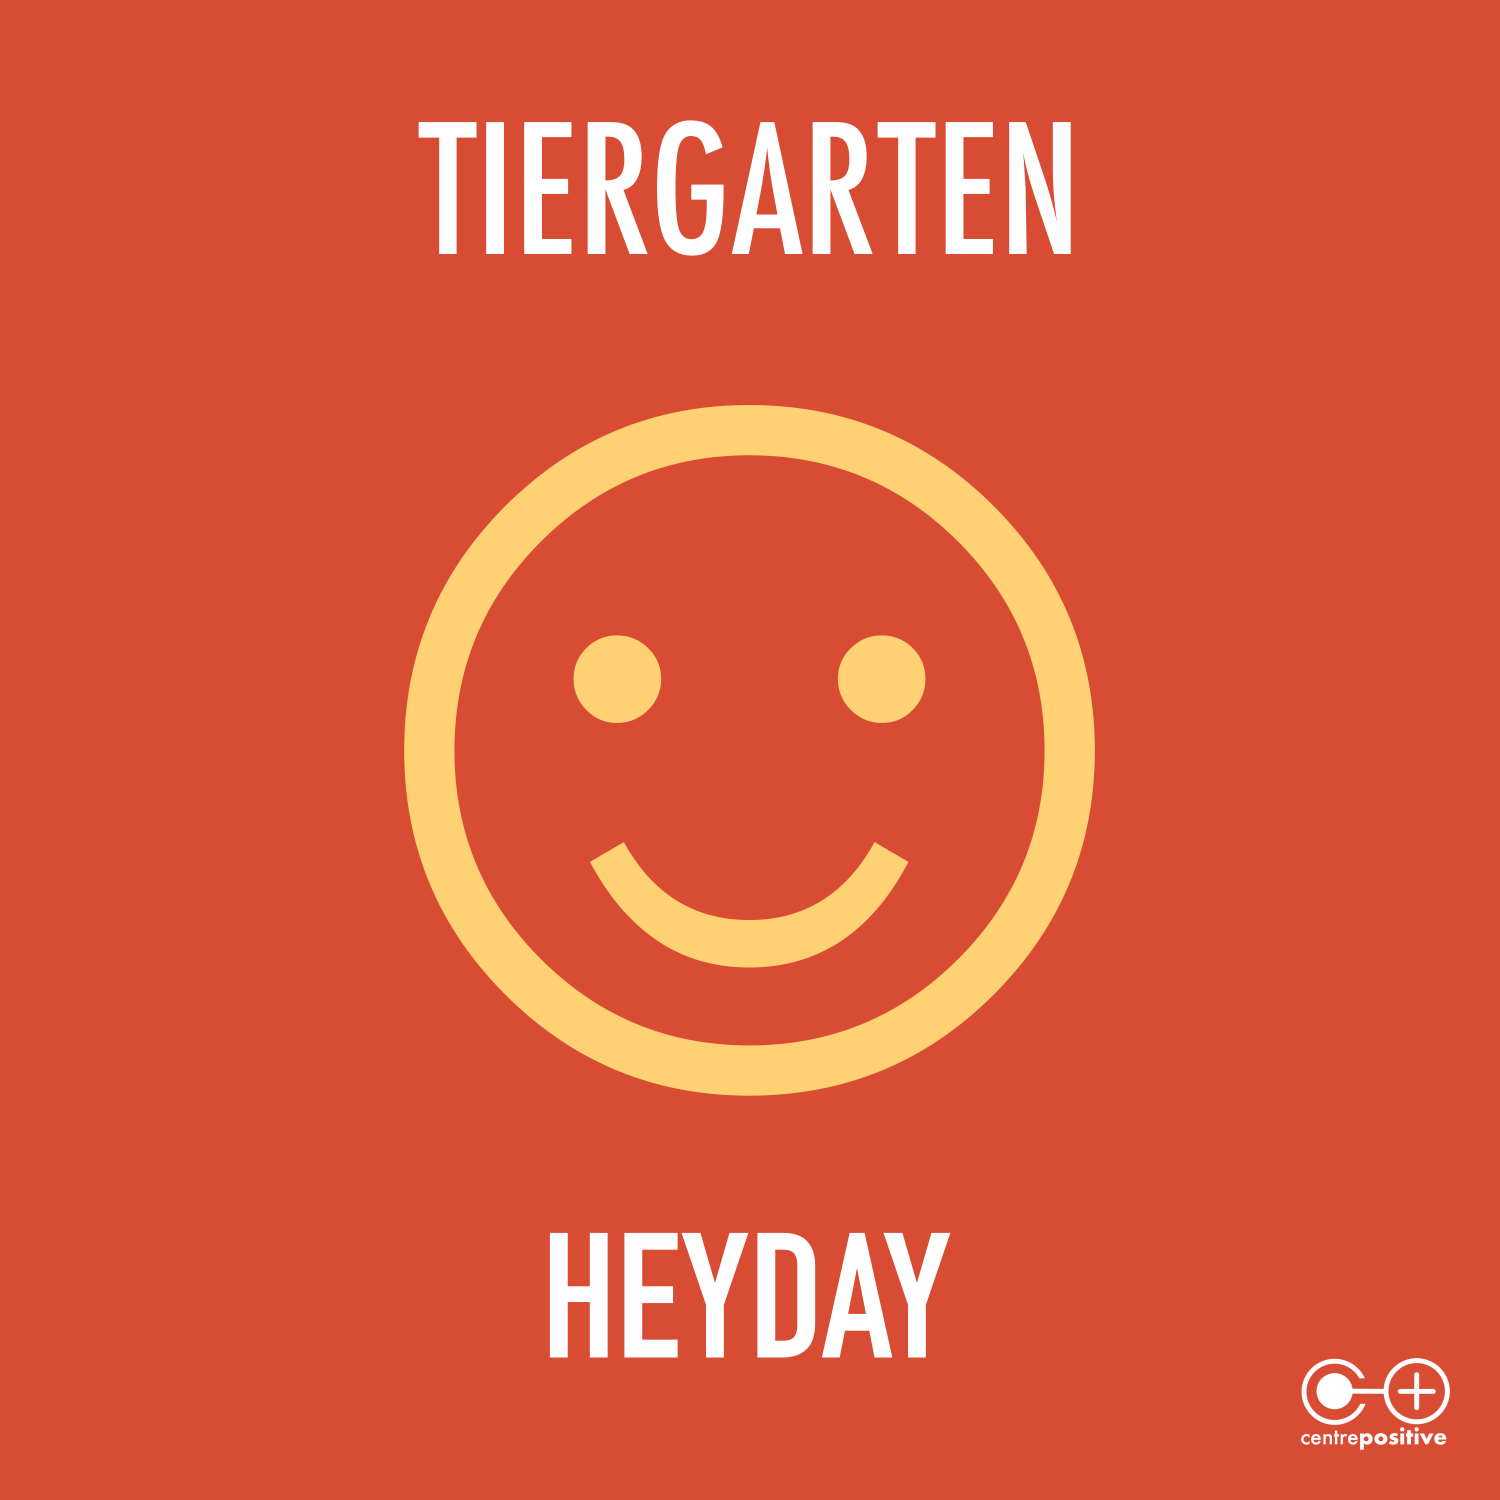 The Heyday single cover